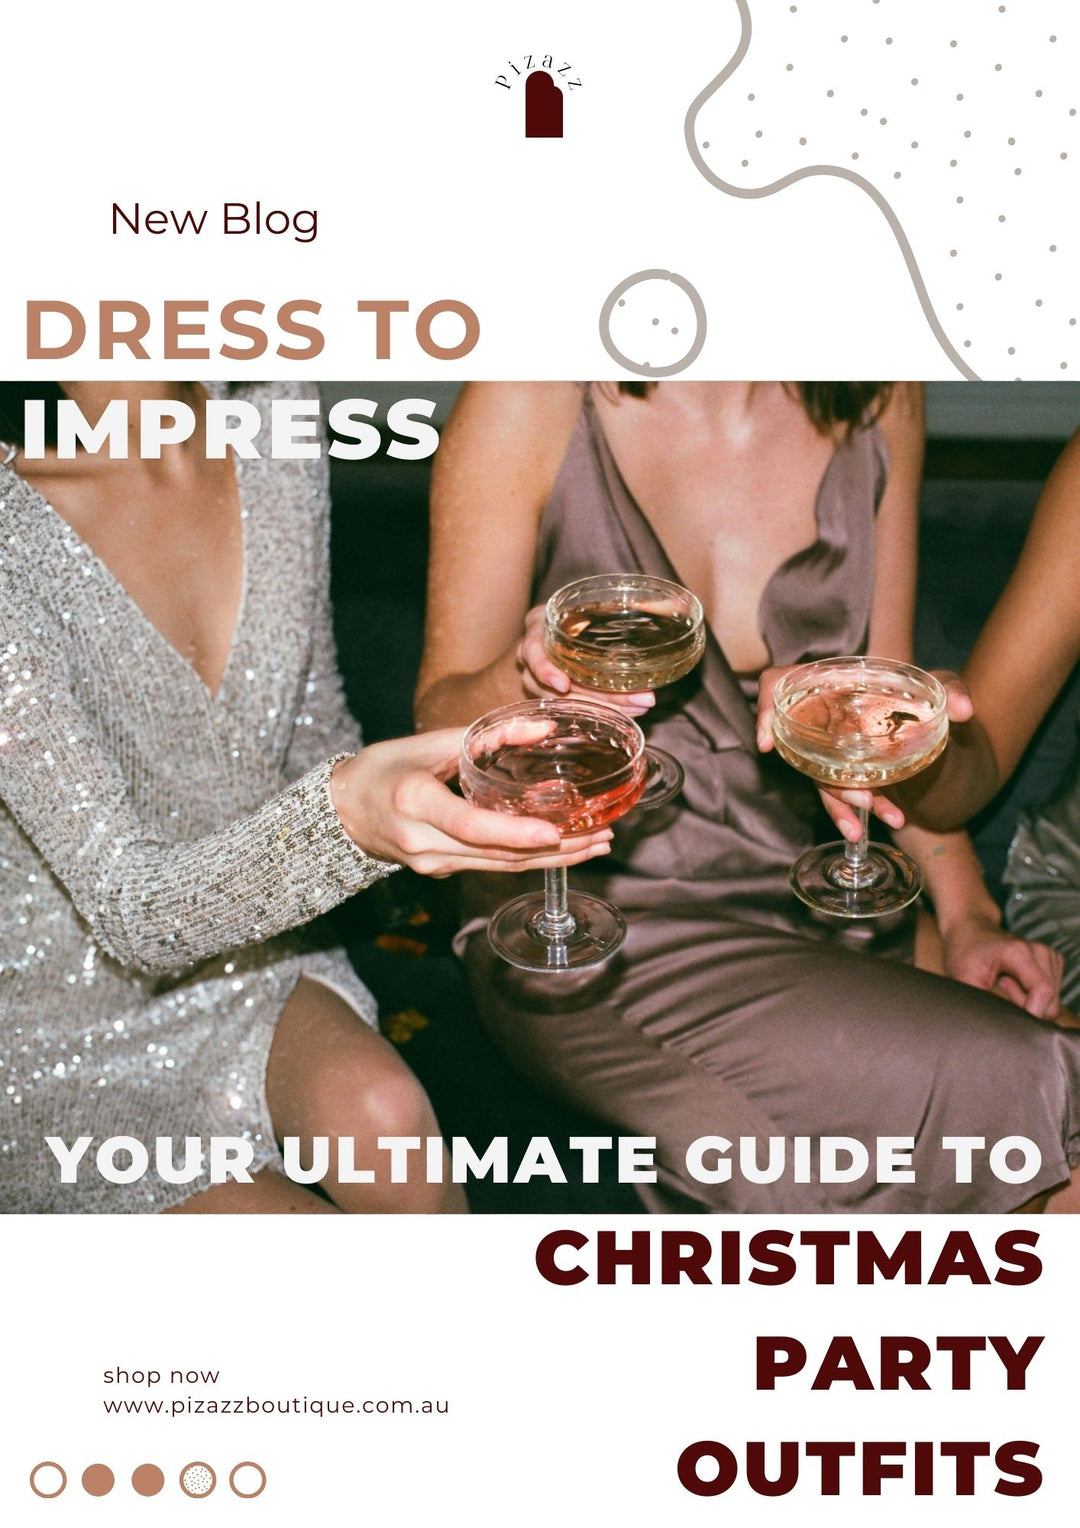 Poster for a new blog at Pizazz Boutique on How To Dress To Impress For Your Next Christmas Party